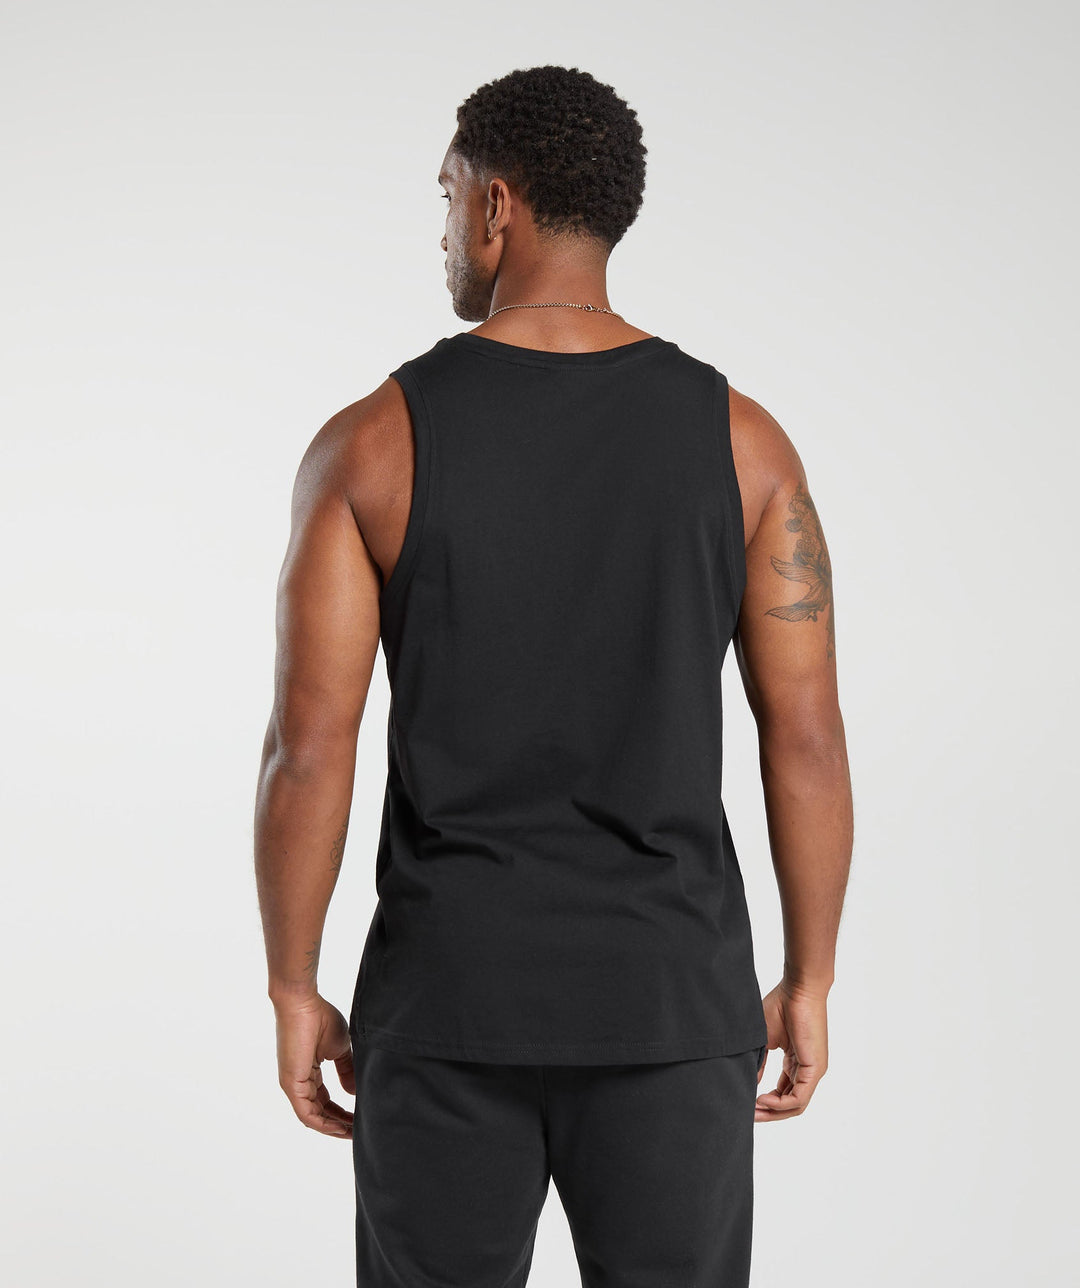 Men's Must-Haves | Gym & Fitness Clothing | Gymshark